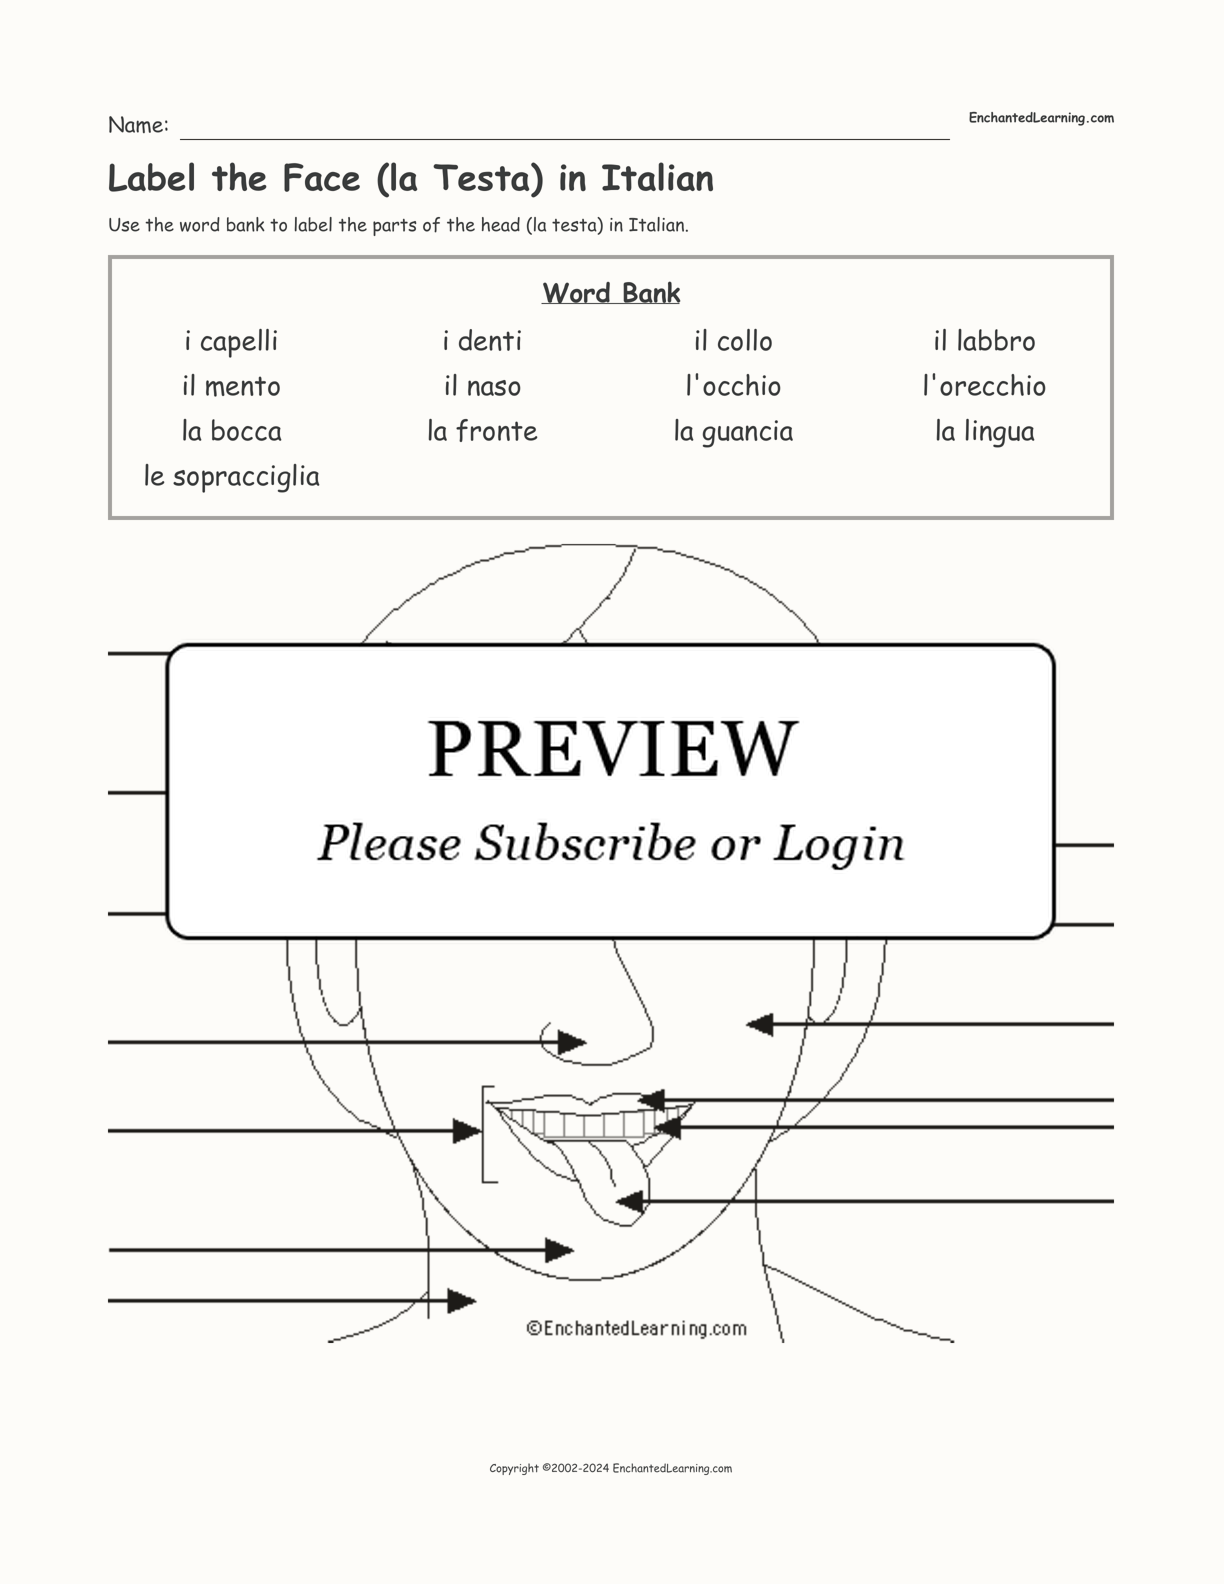 Label the Face (la Testa) in Italian interactive worksheet page 1